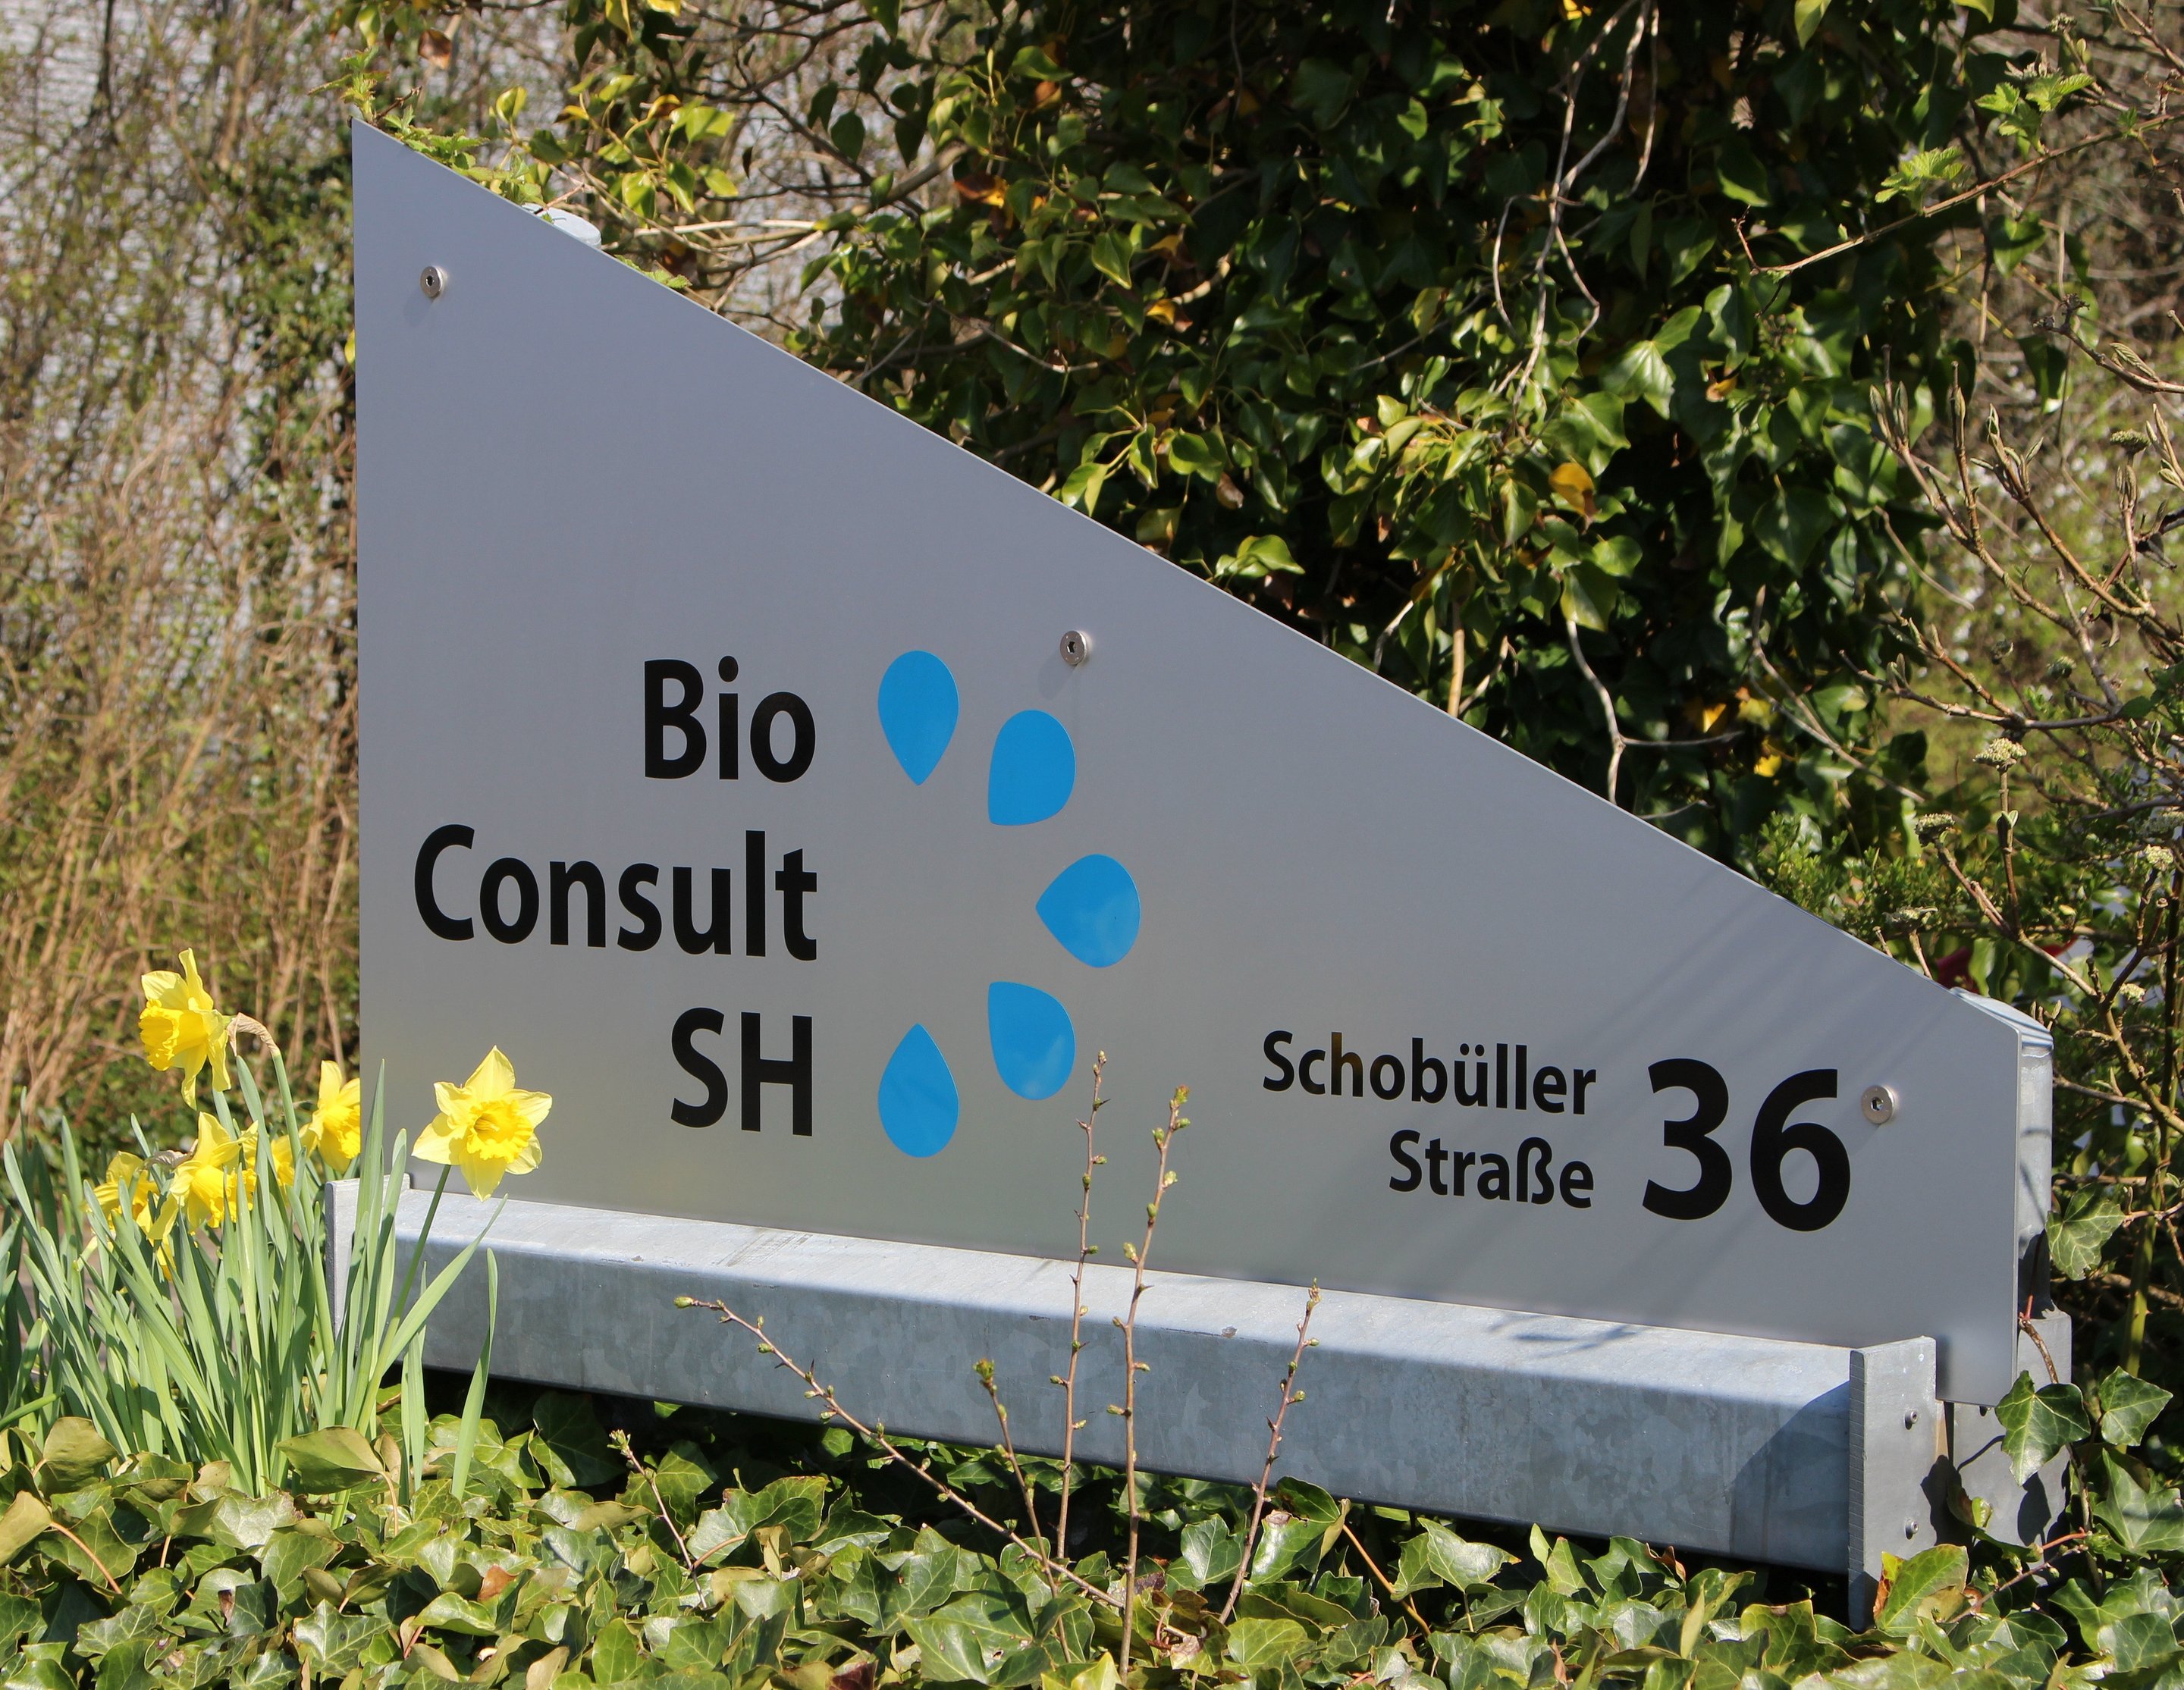 A plate with the company logo and address of BioConsult SH.